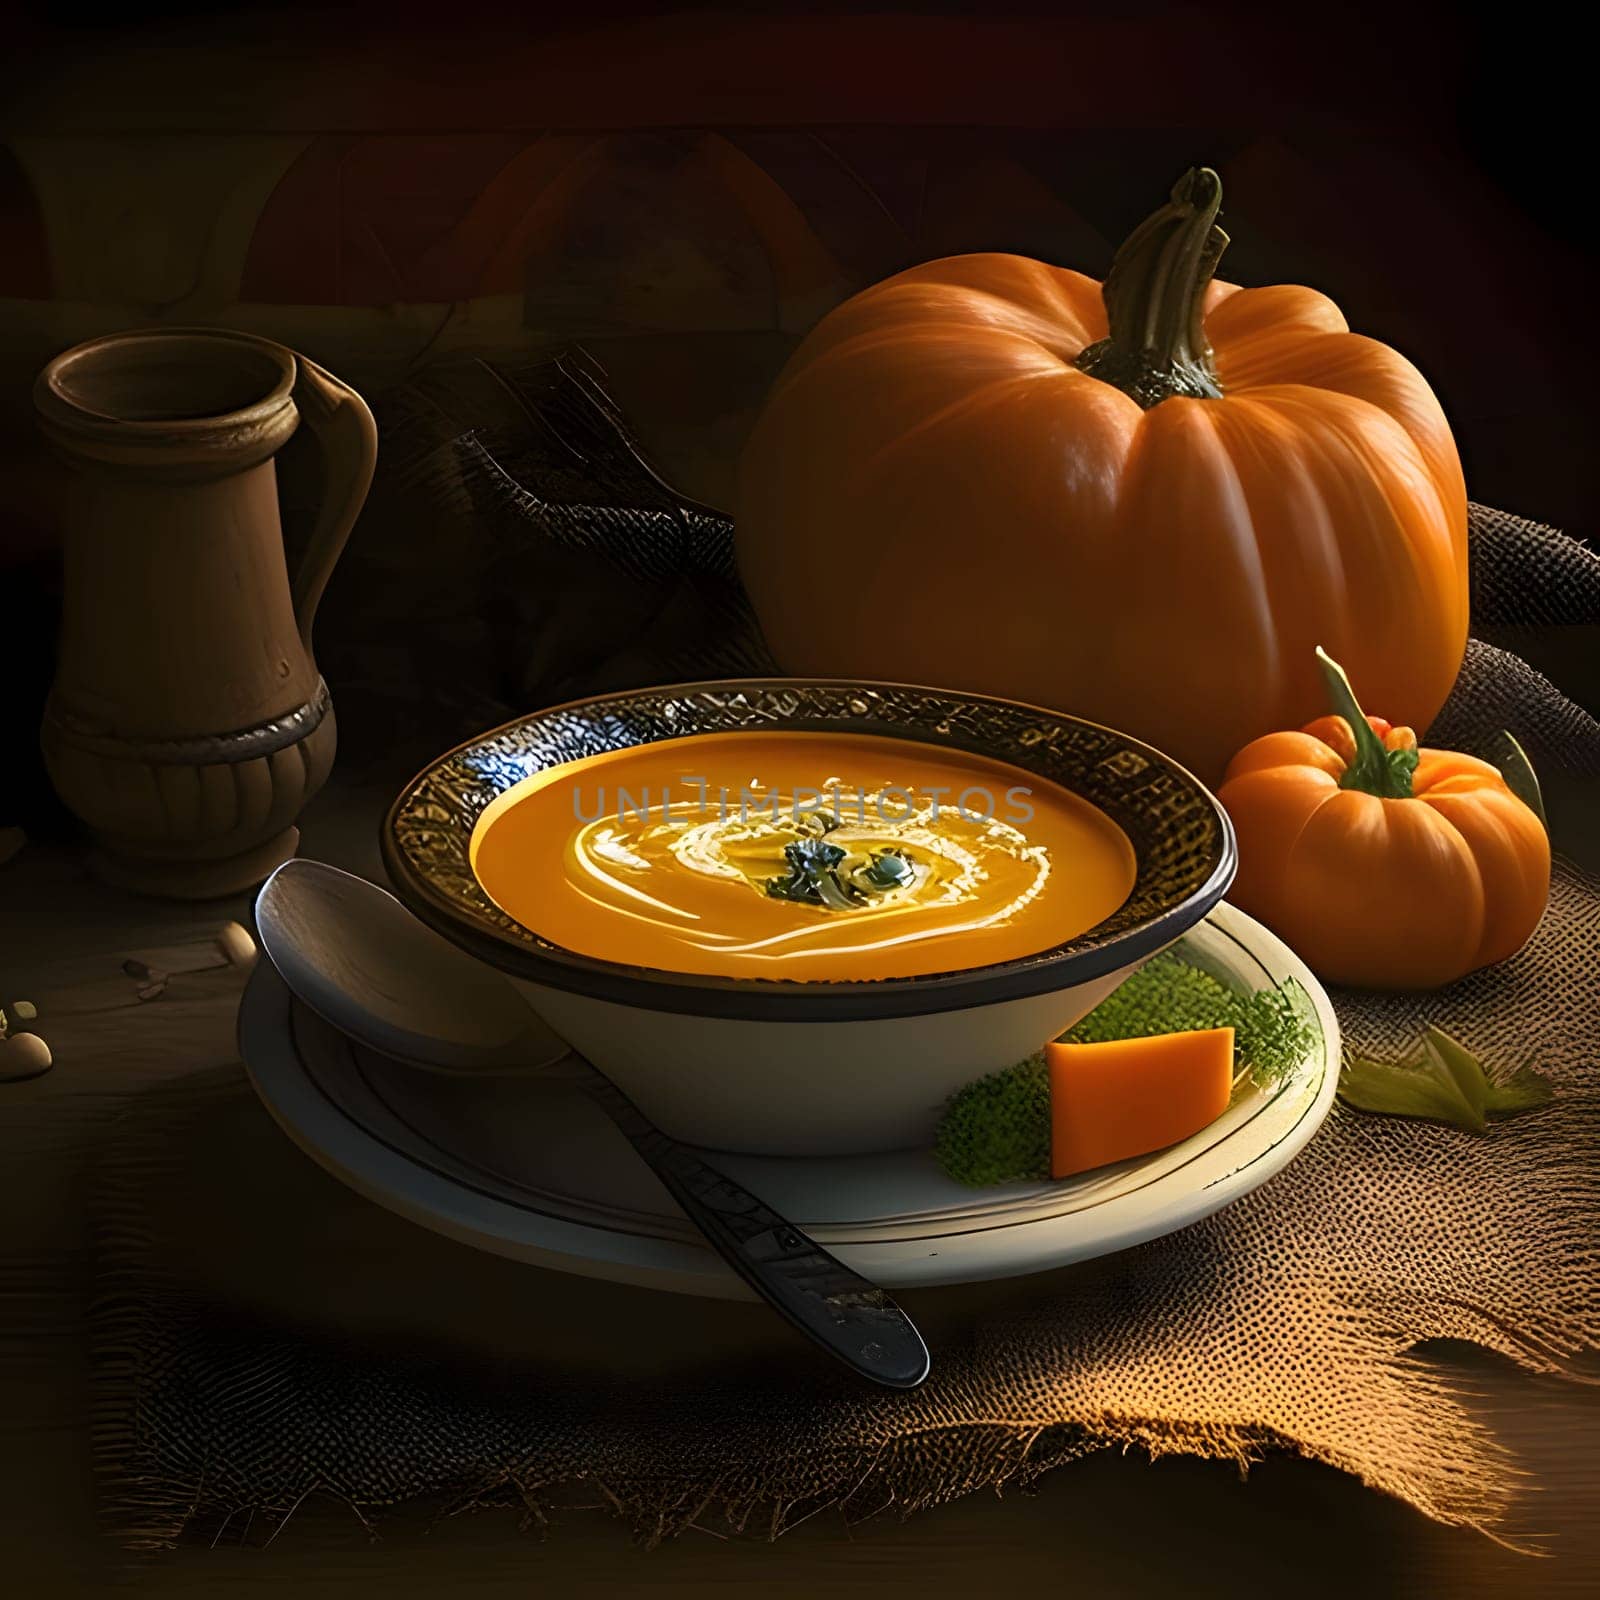 Pumpkin soup in a bowl, with pumpkins and fabric all around. Pumpkin as a dish of thanksgiving for the harvest. by ThemesS